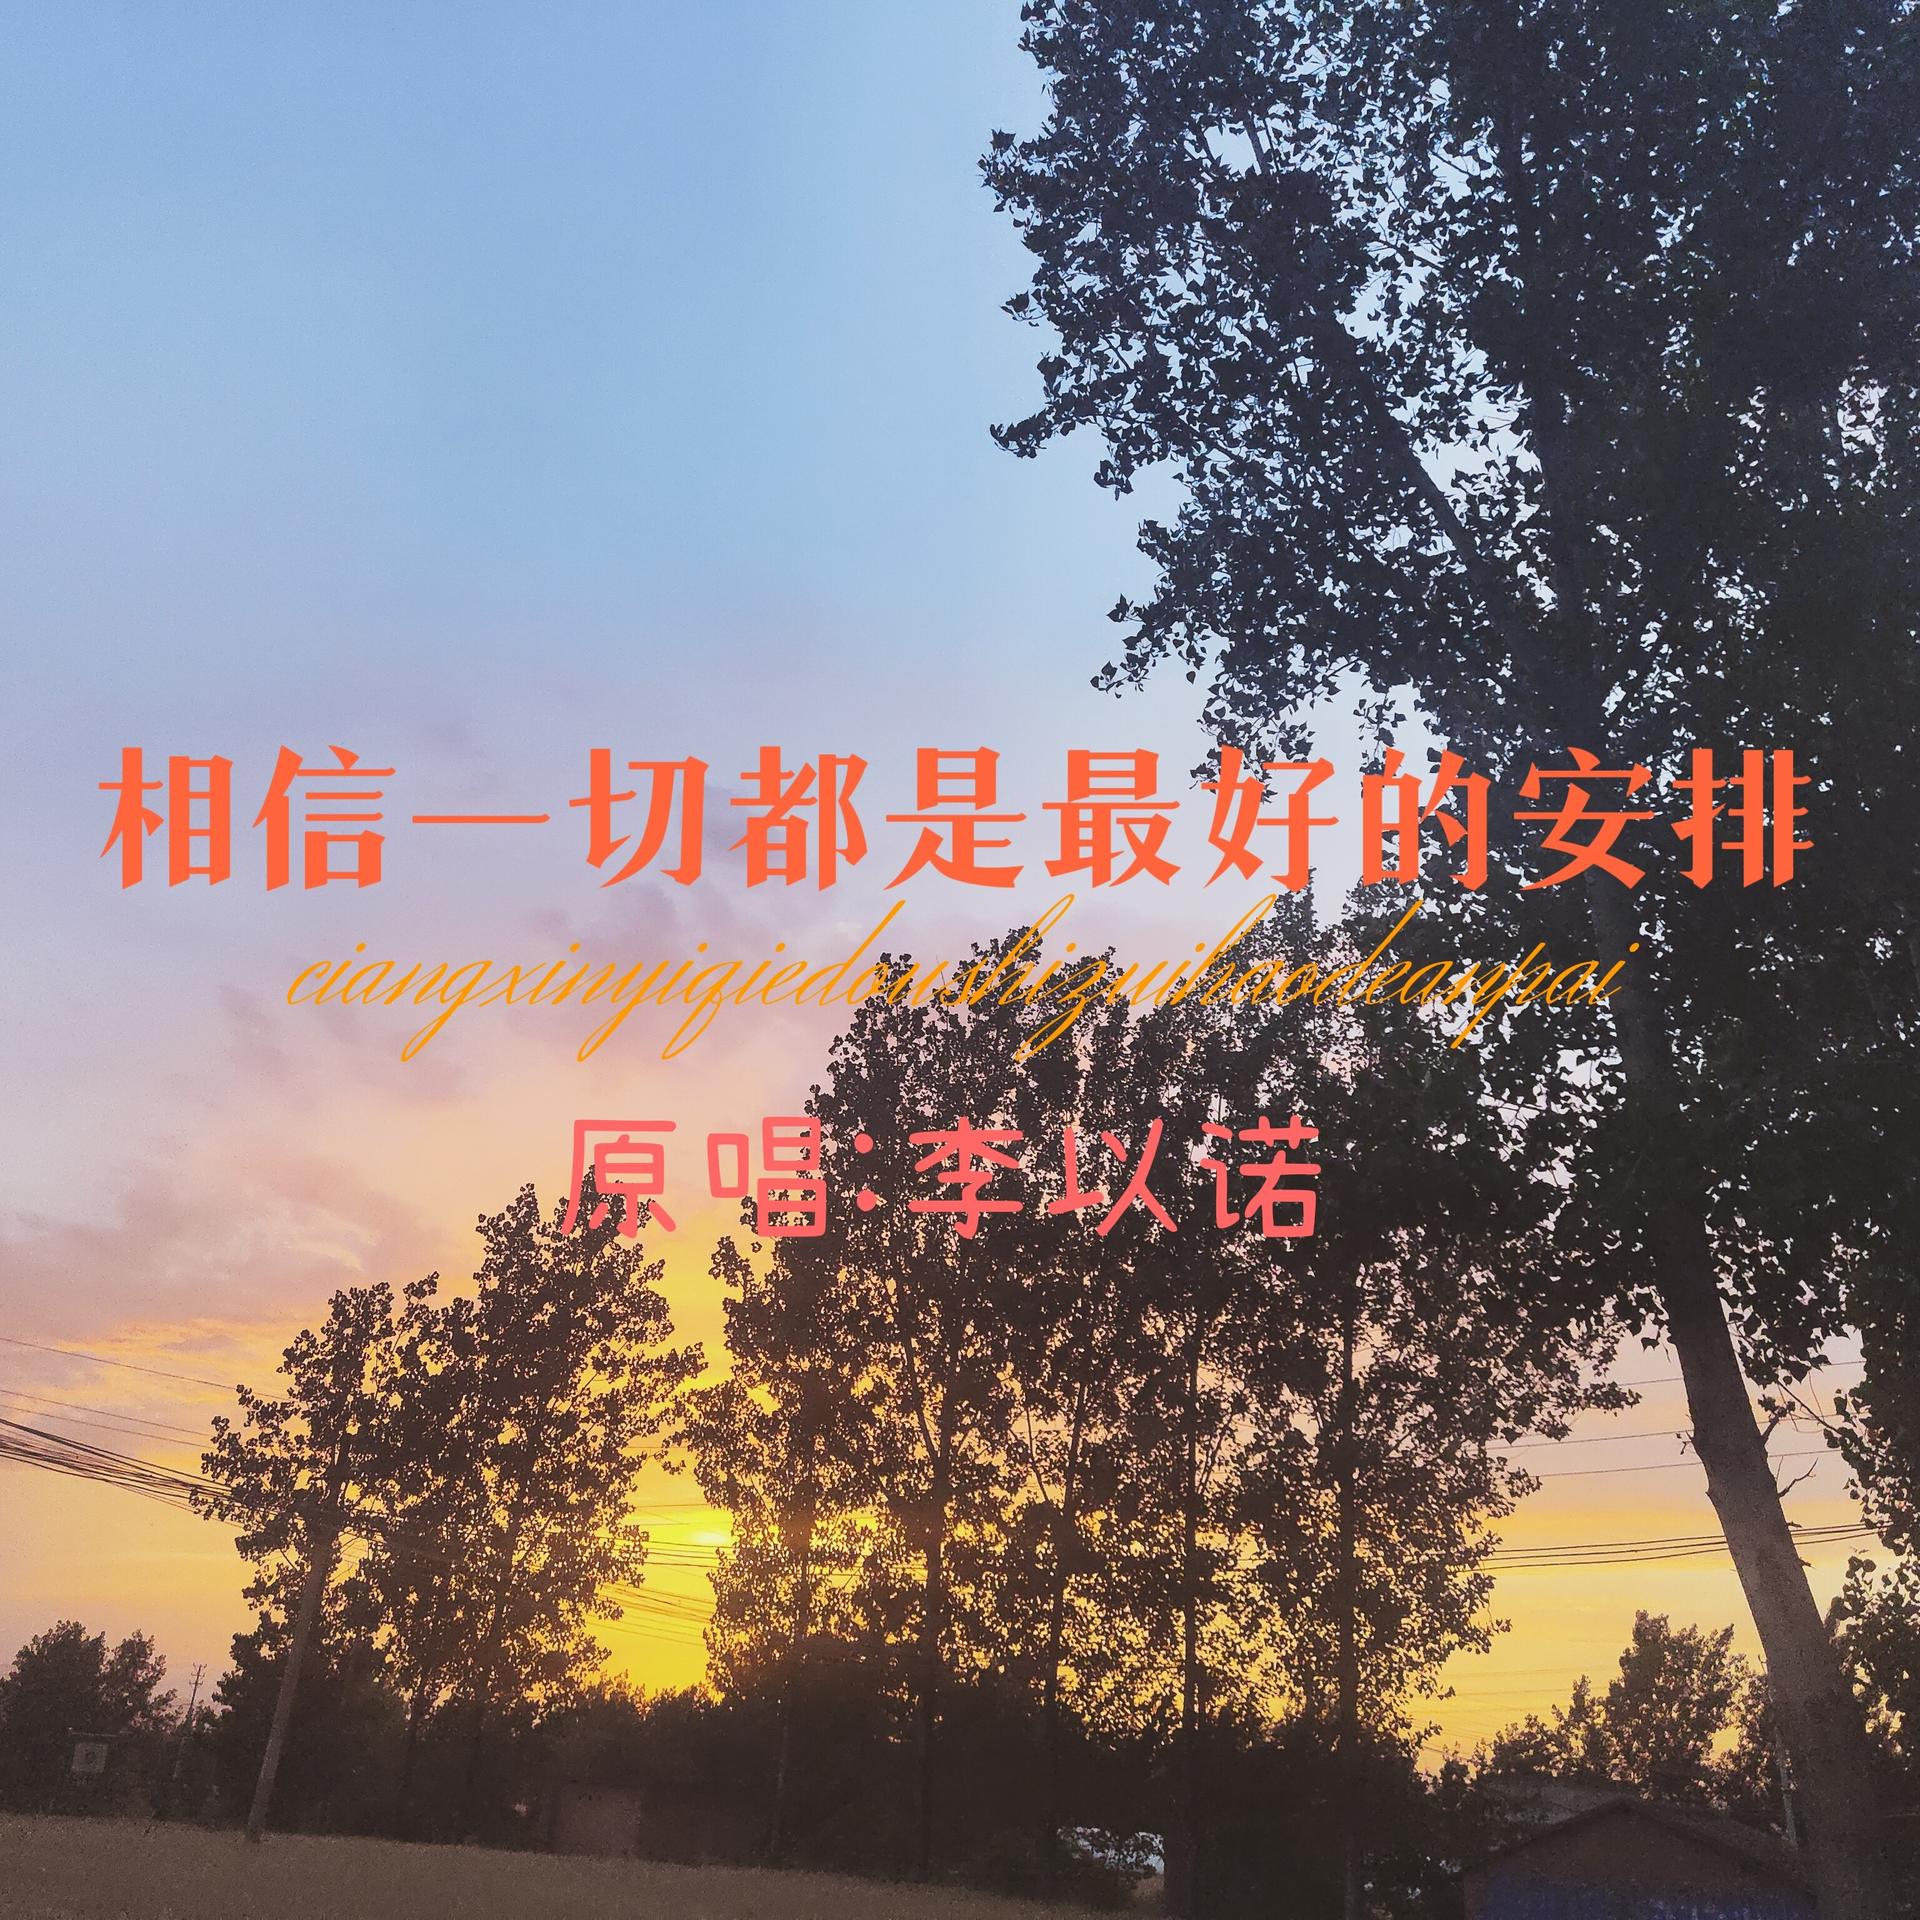 Everything Is the Best Arrangement 一切都是最好的安排 by Jia Cuo 加措 | Goodreads